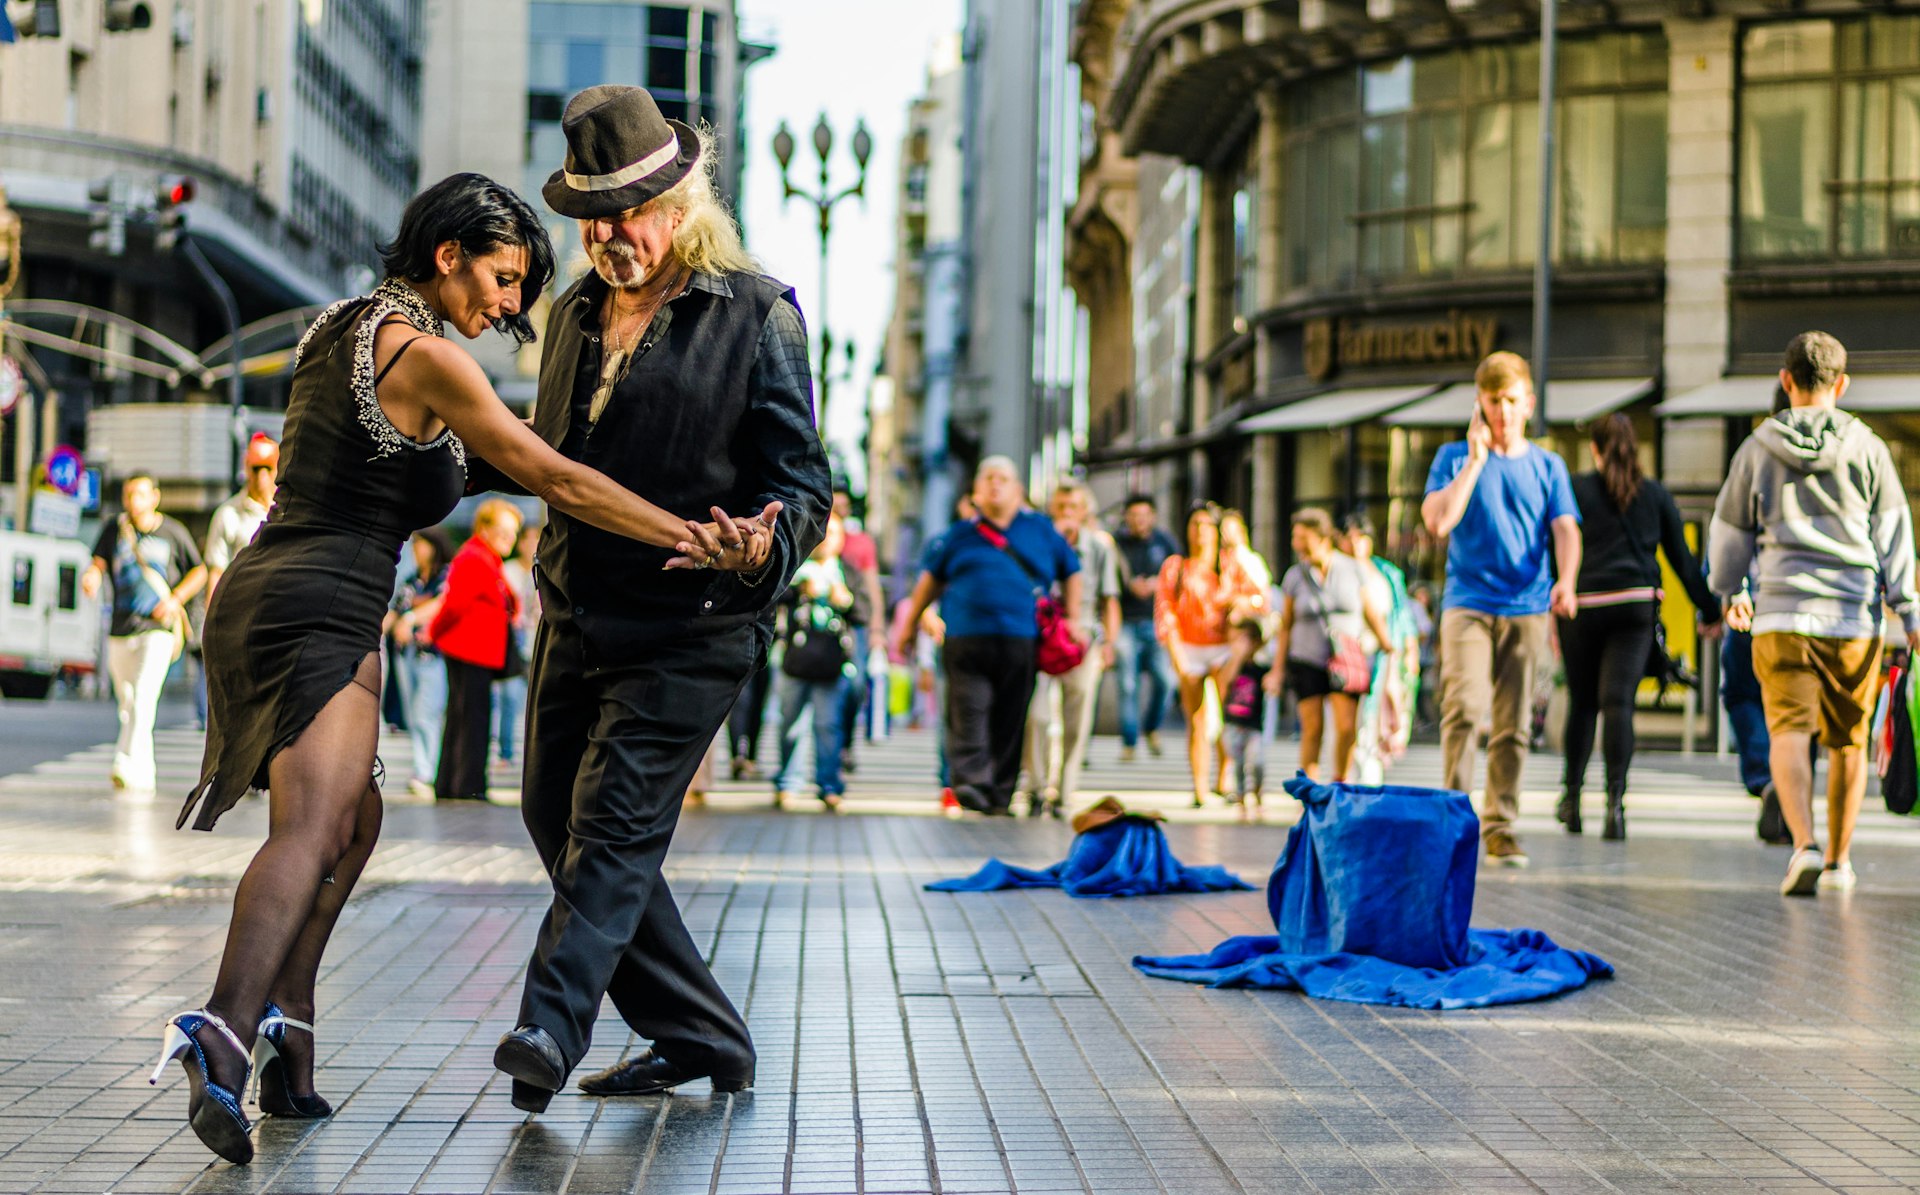 A couple dressed all in black dance a tango together in the street with some people looking on